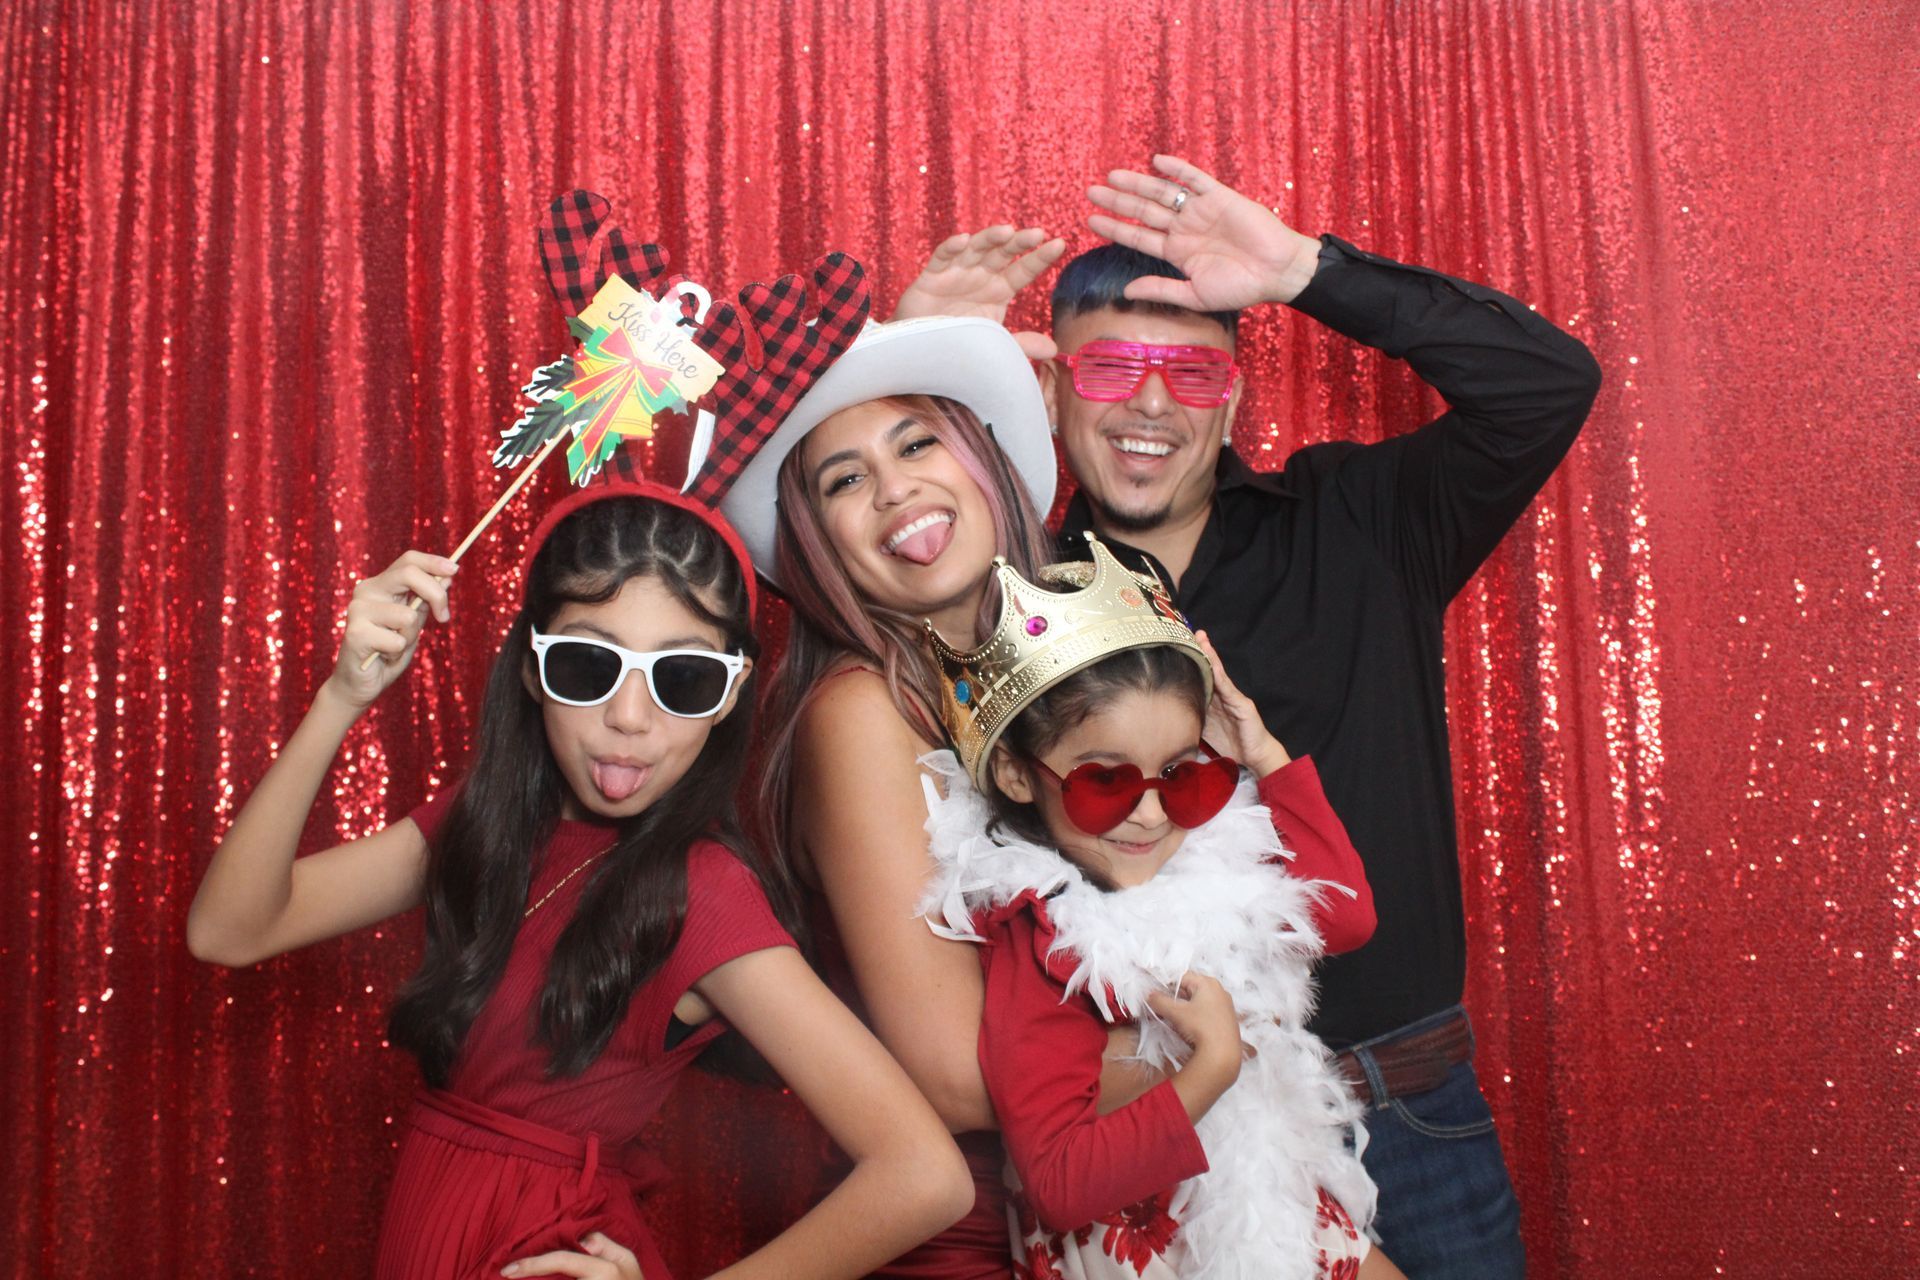 Charlotte North Carolina photo booth rental company making sure everyone at this Charlotte party has a great time!